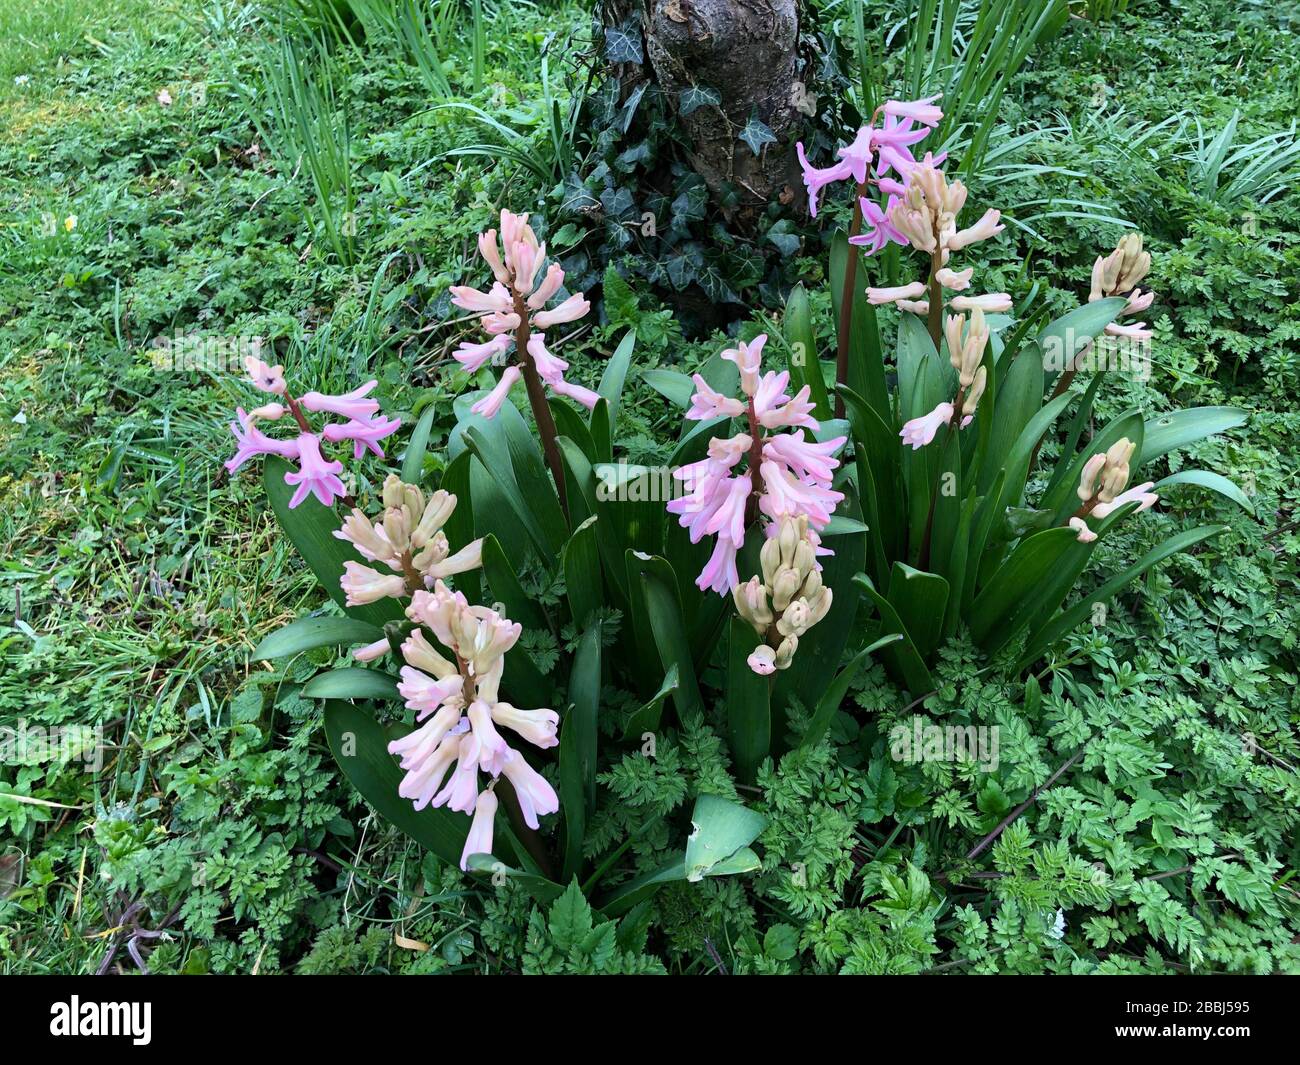 pink hyacinths naturalised at hte foot of an apple tree Stock Photo